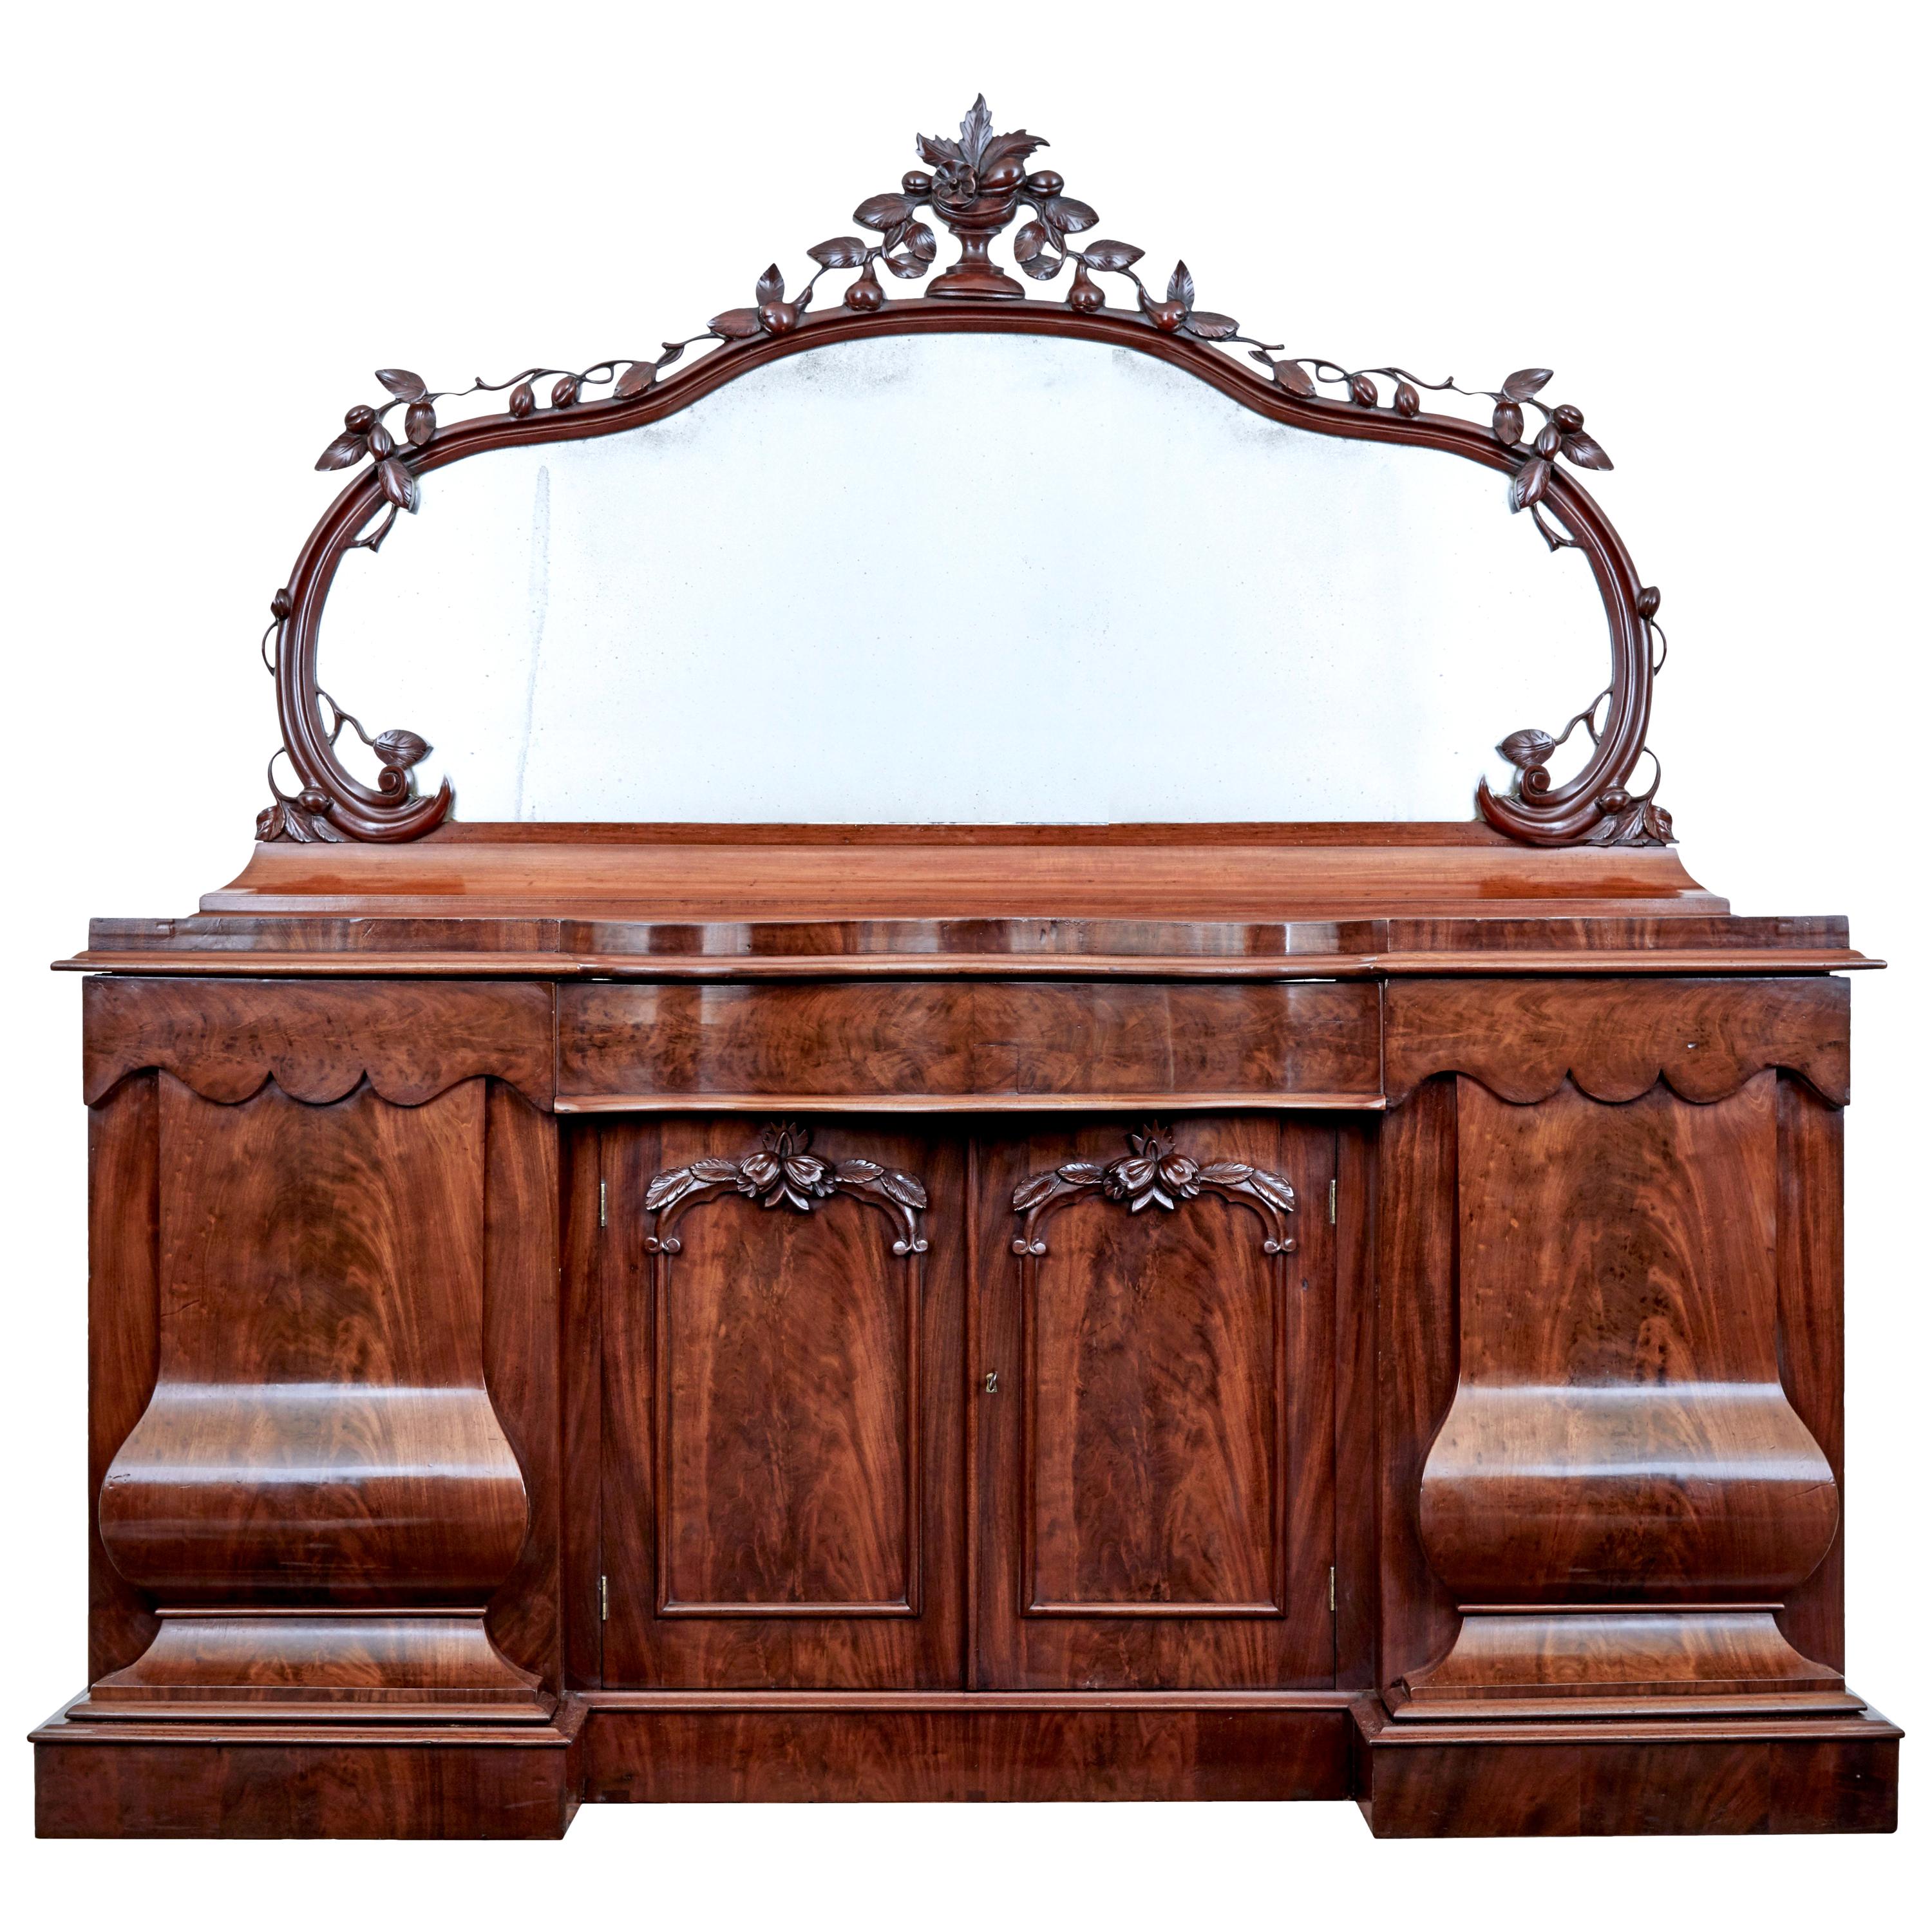 High Victorian Shaped Flame Mahogany Mirror Topped Sideboard